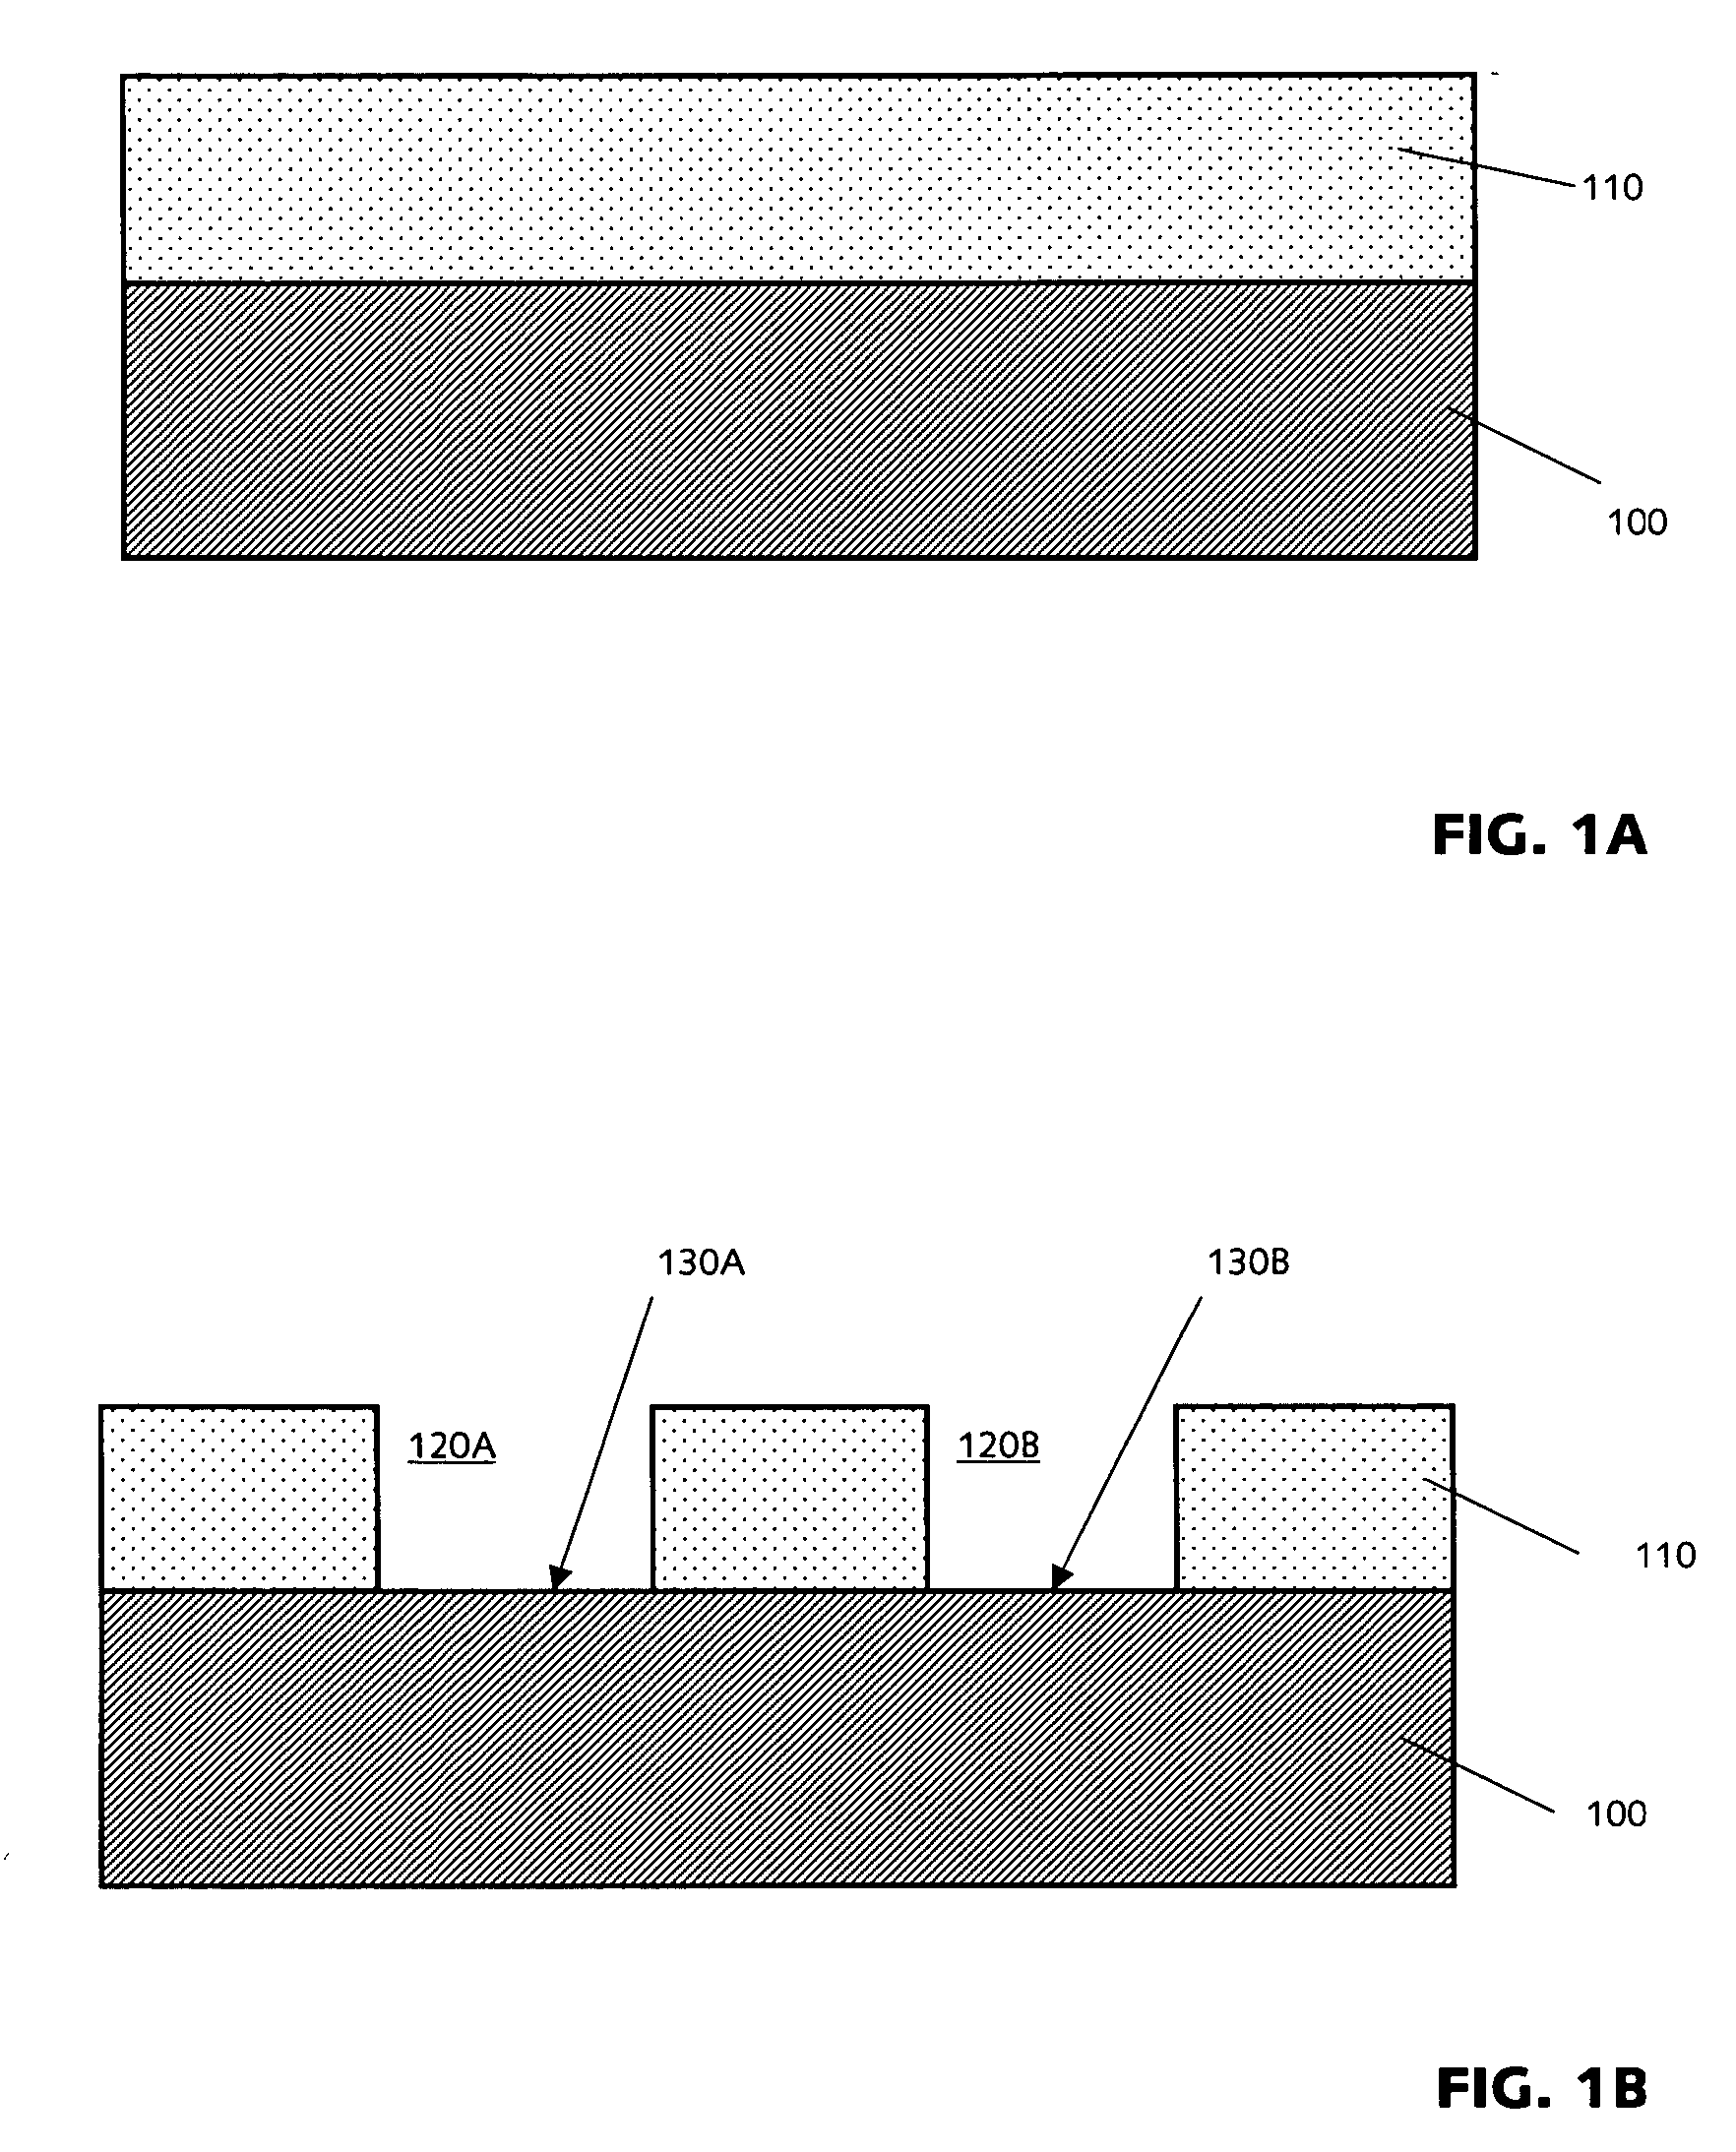 Methods for integrating lattice-mismatched semiconductor structure on insulators